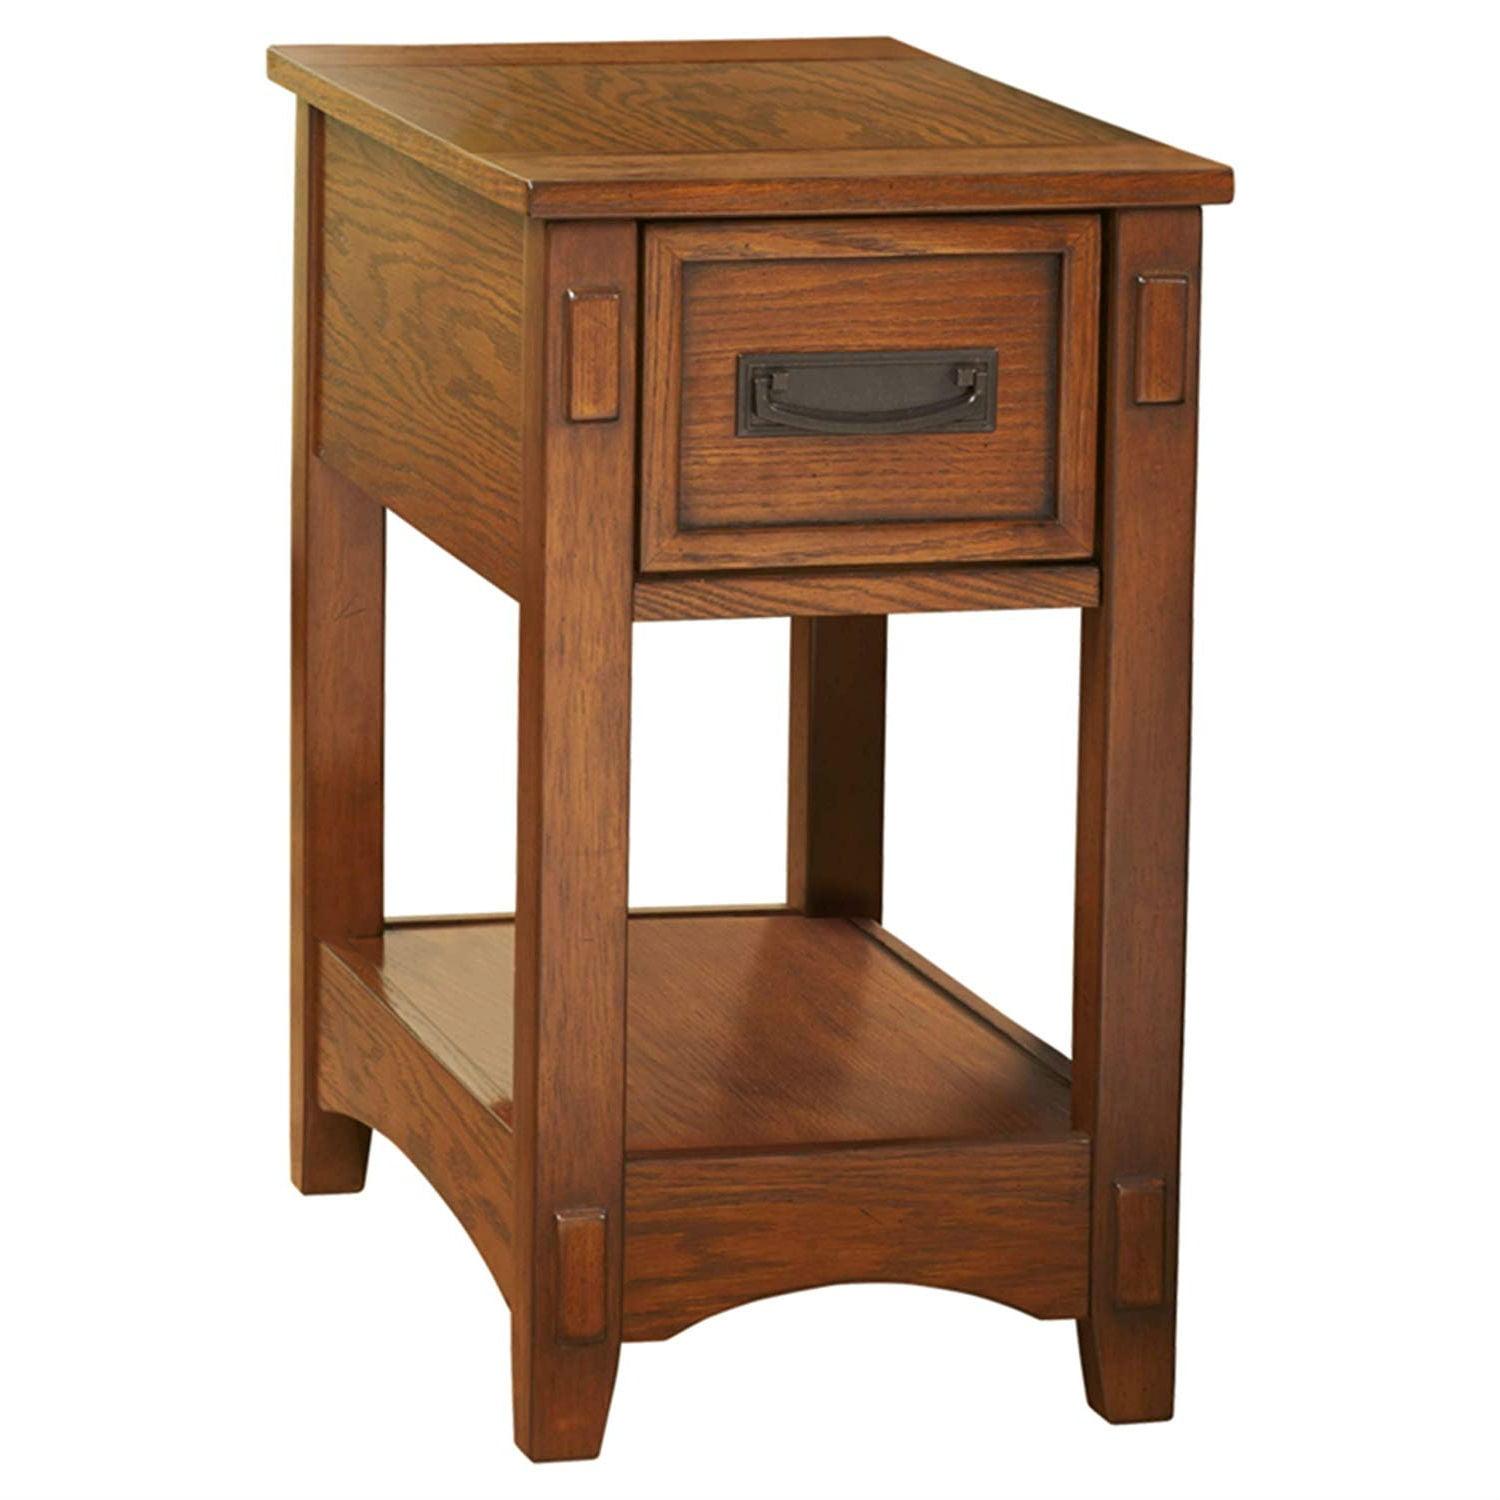 Contemporary Brown Wood End Table with Drawer and Shelf